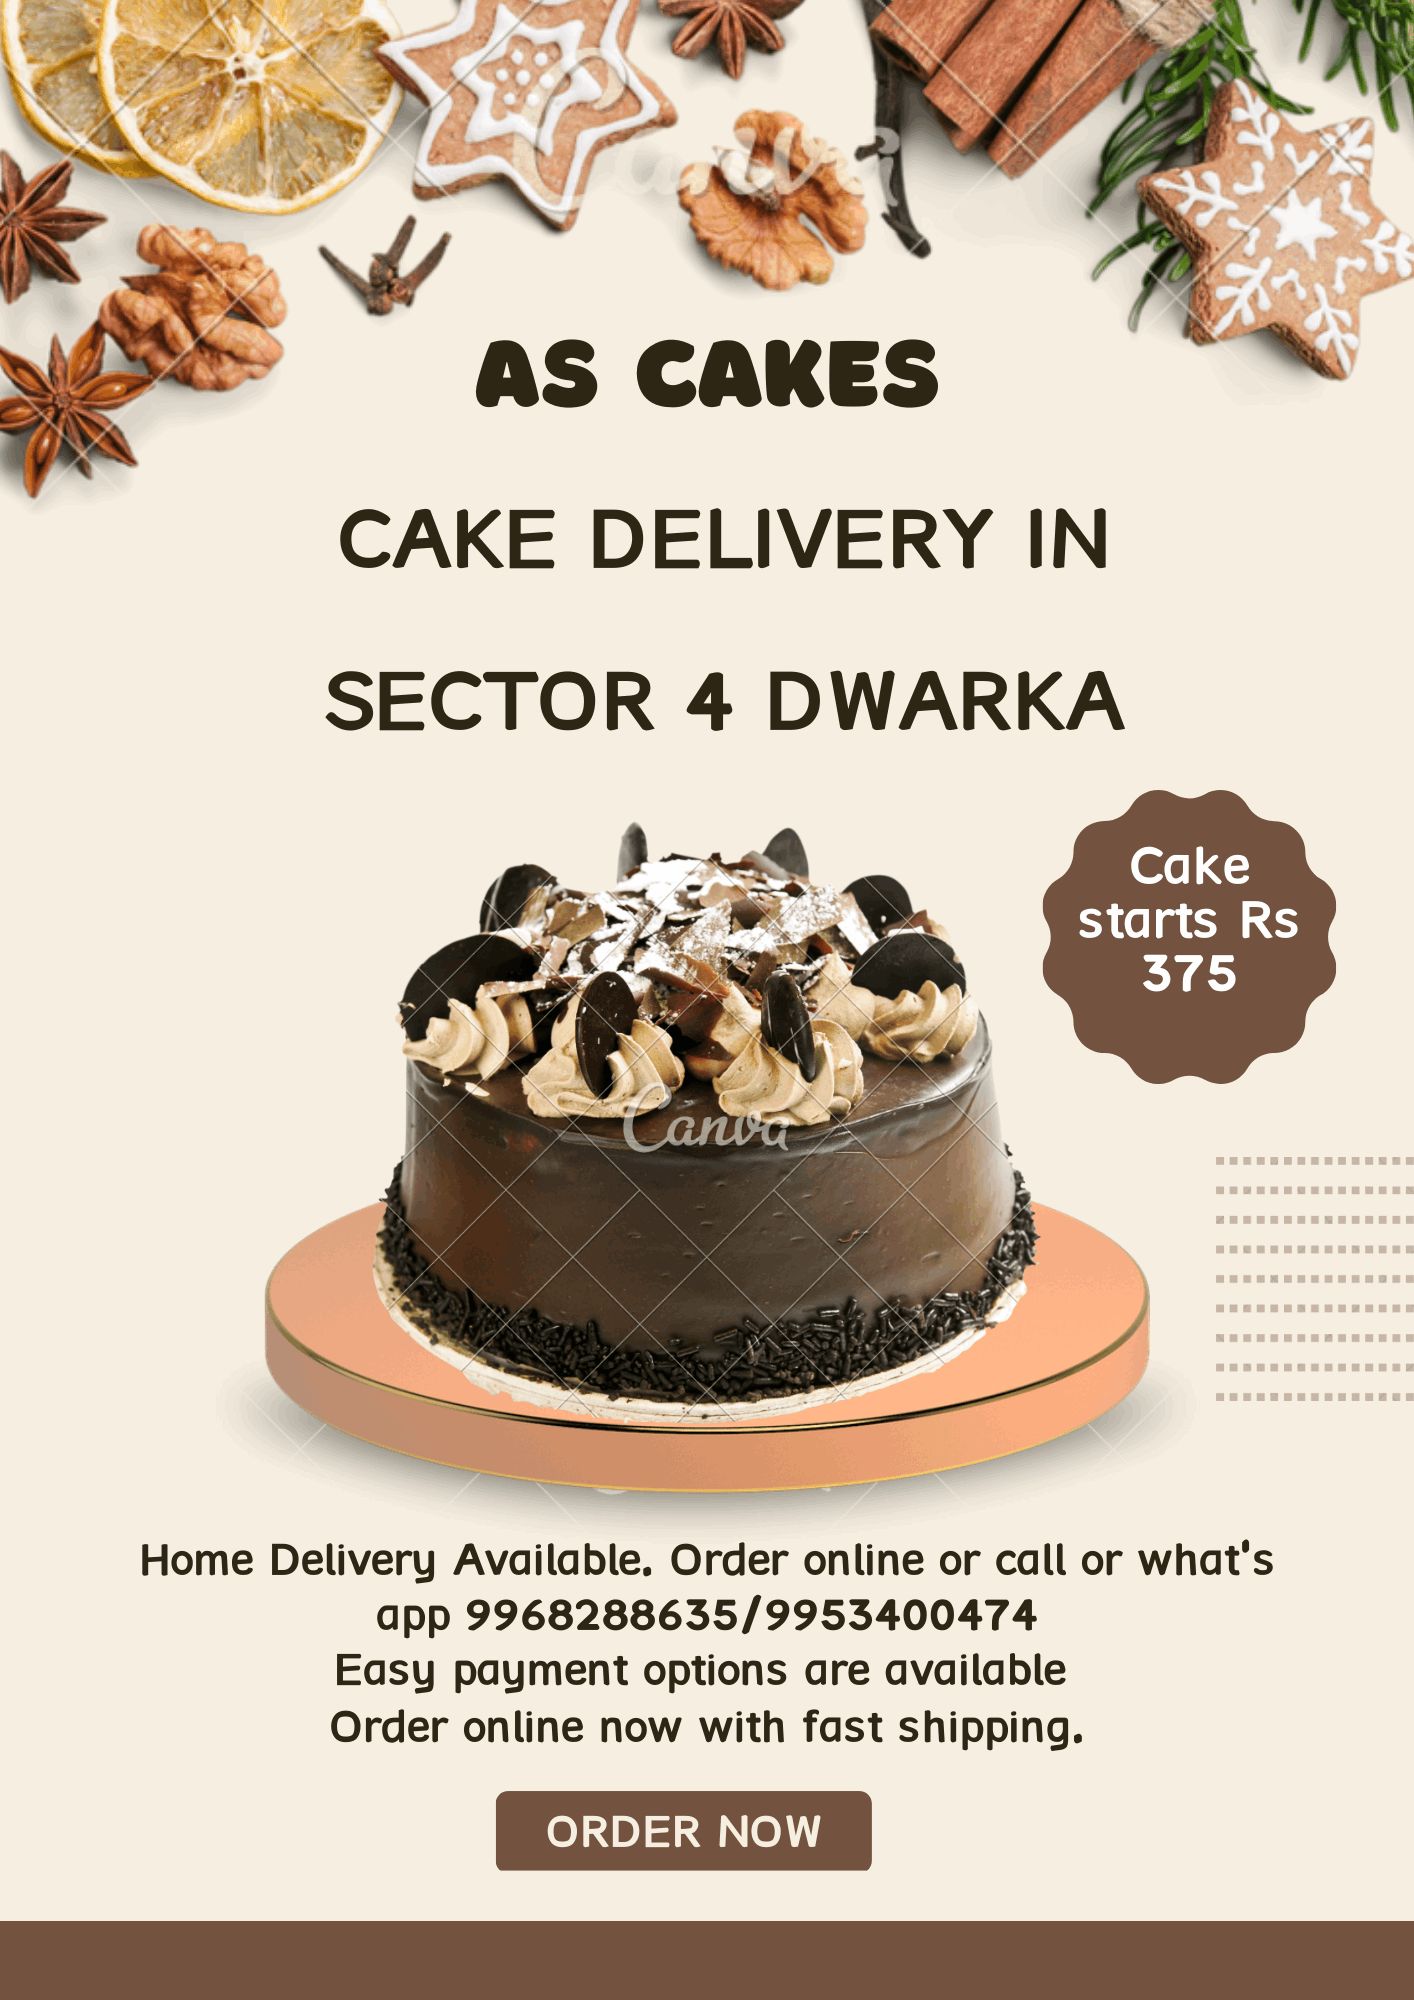 AS CAKES CAKE DELIVERY IN SECTOR 4 DWARKA